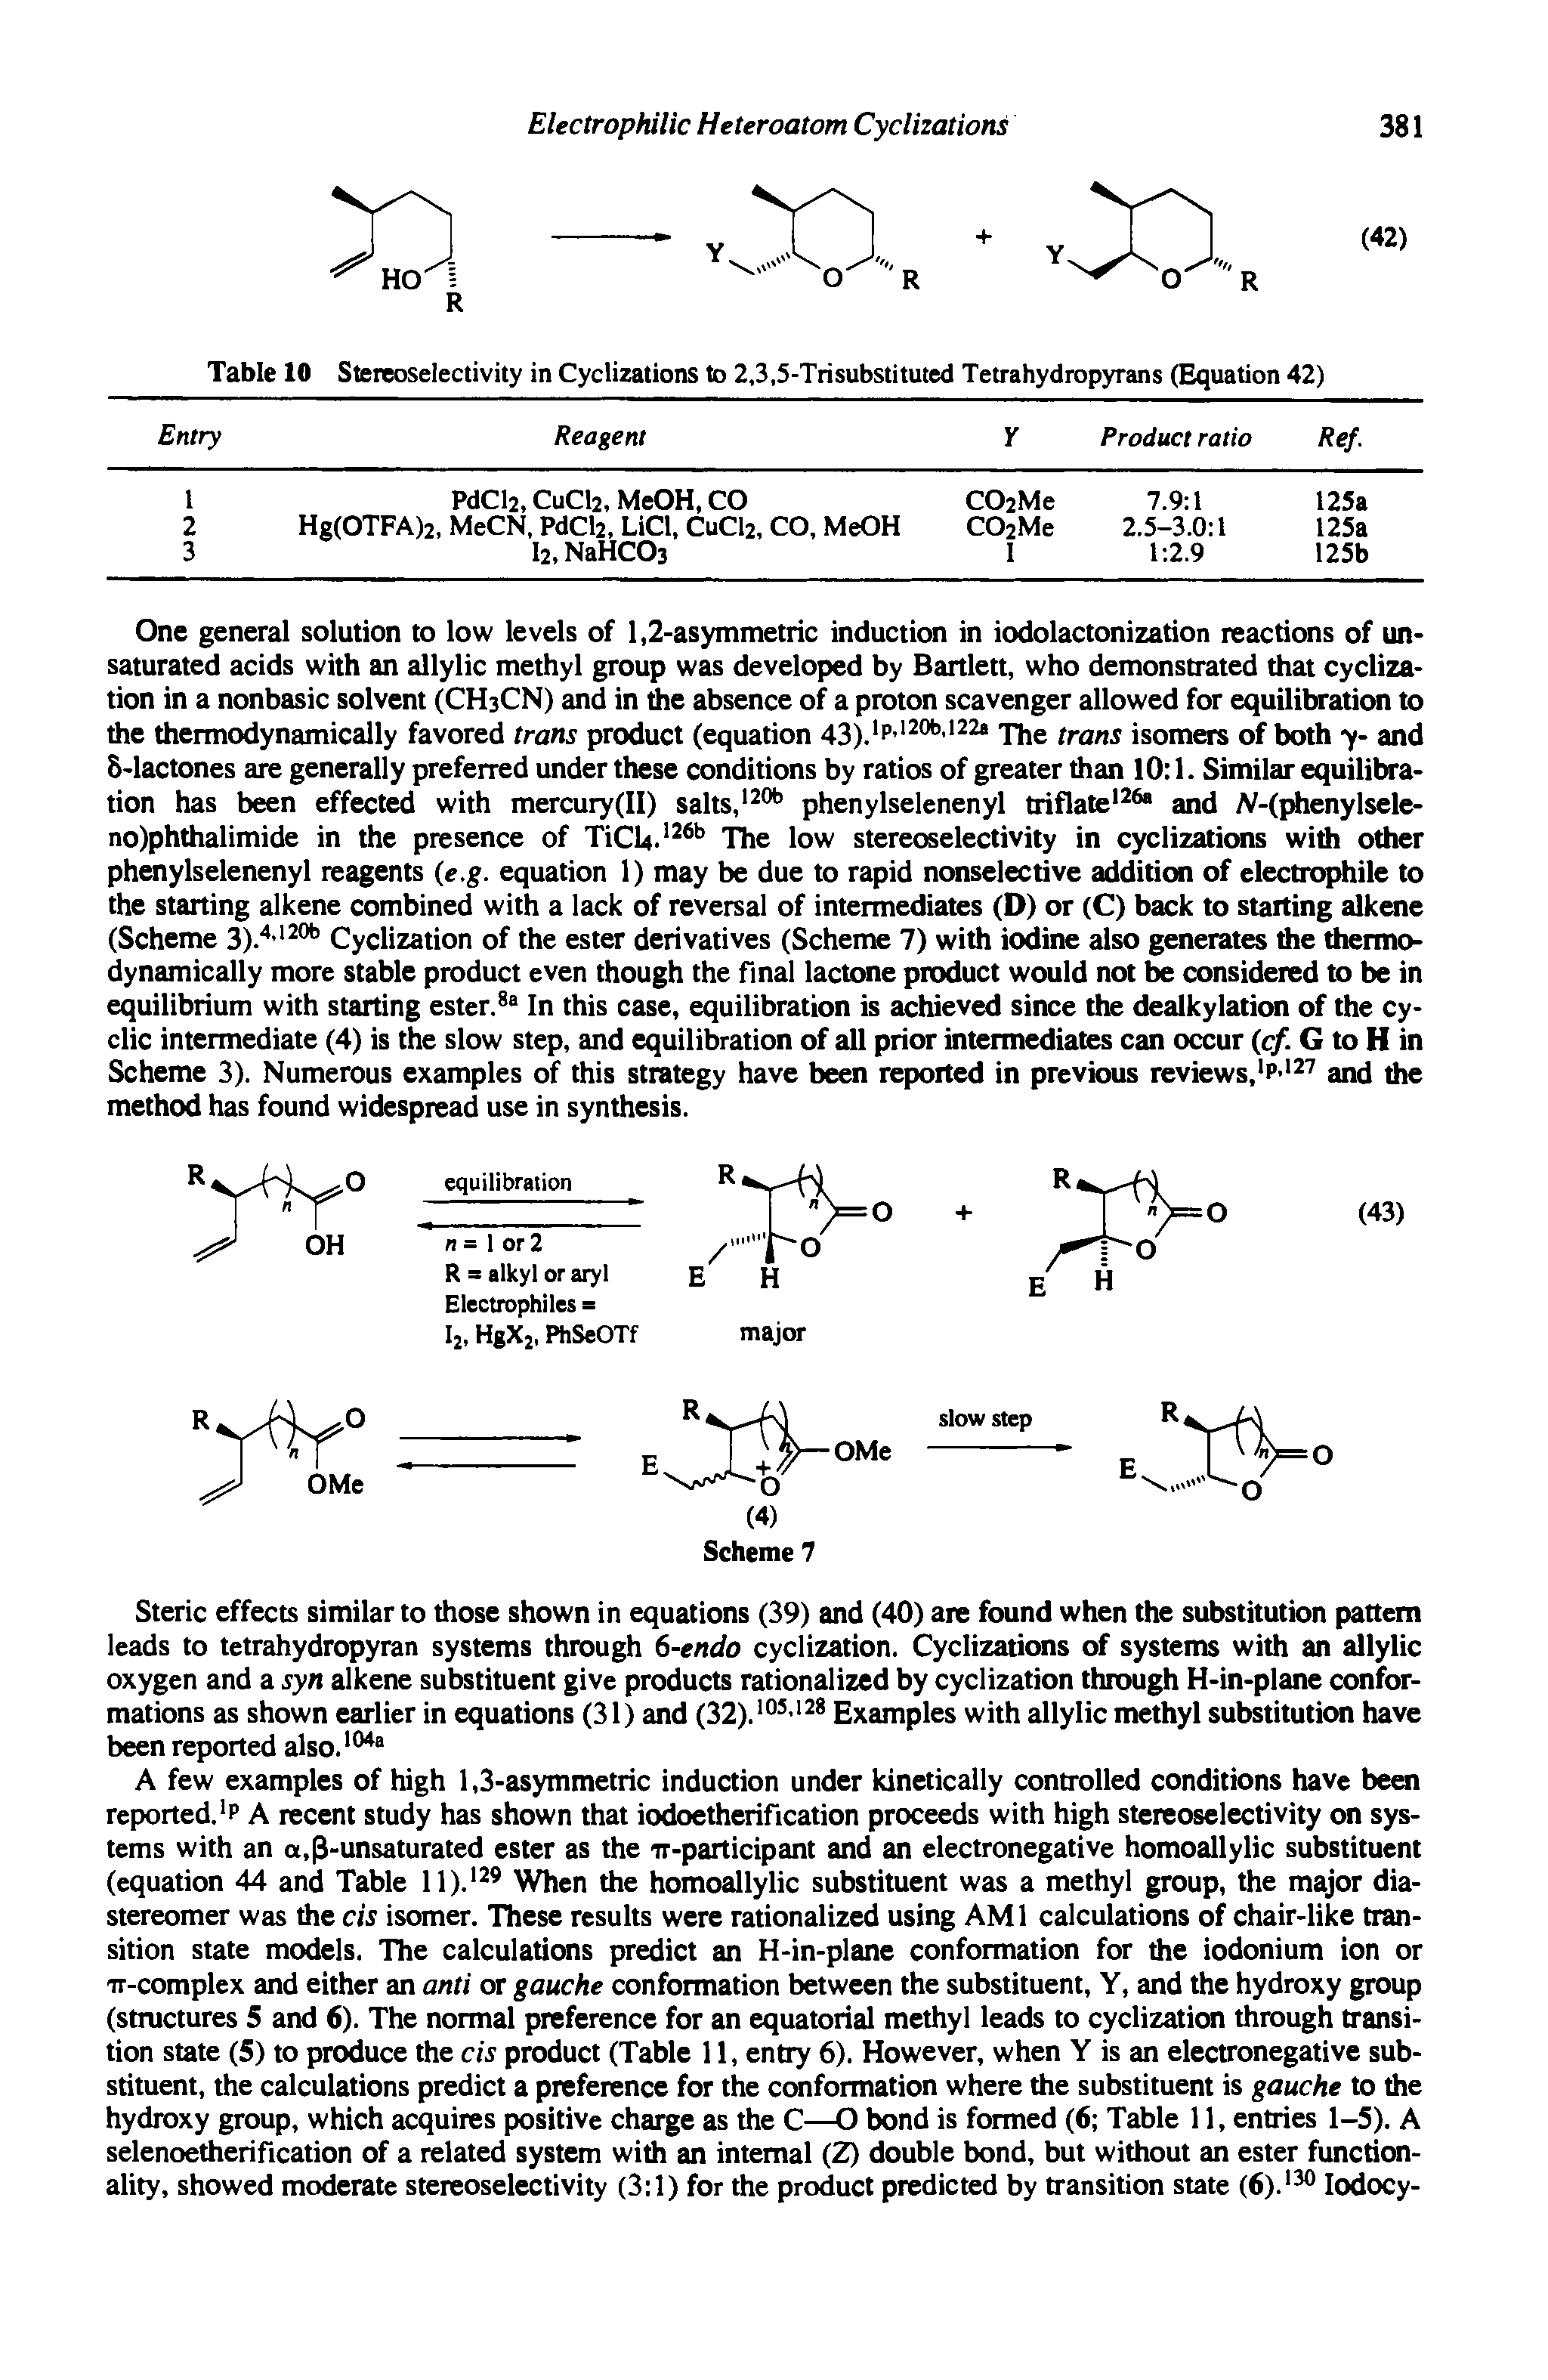 Table 10 Stereoselectivity in Cyclizations to 2,3,5-Trisubstituted Tetrahydropyrans (Equation 42)...